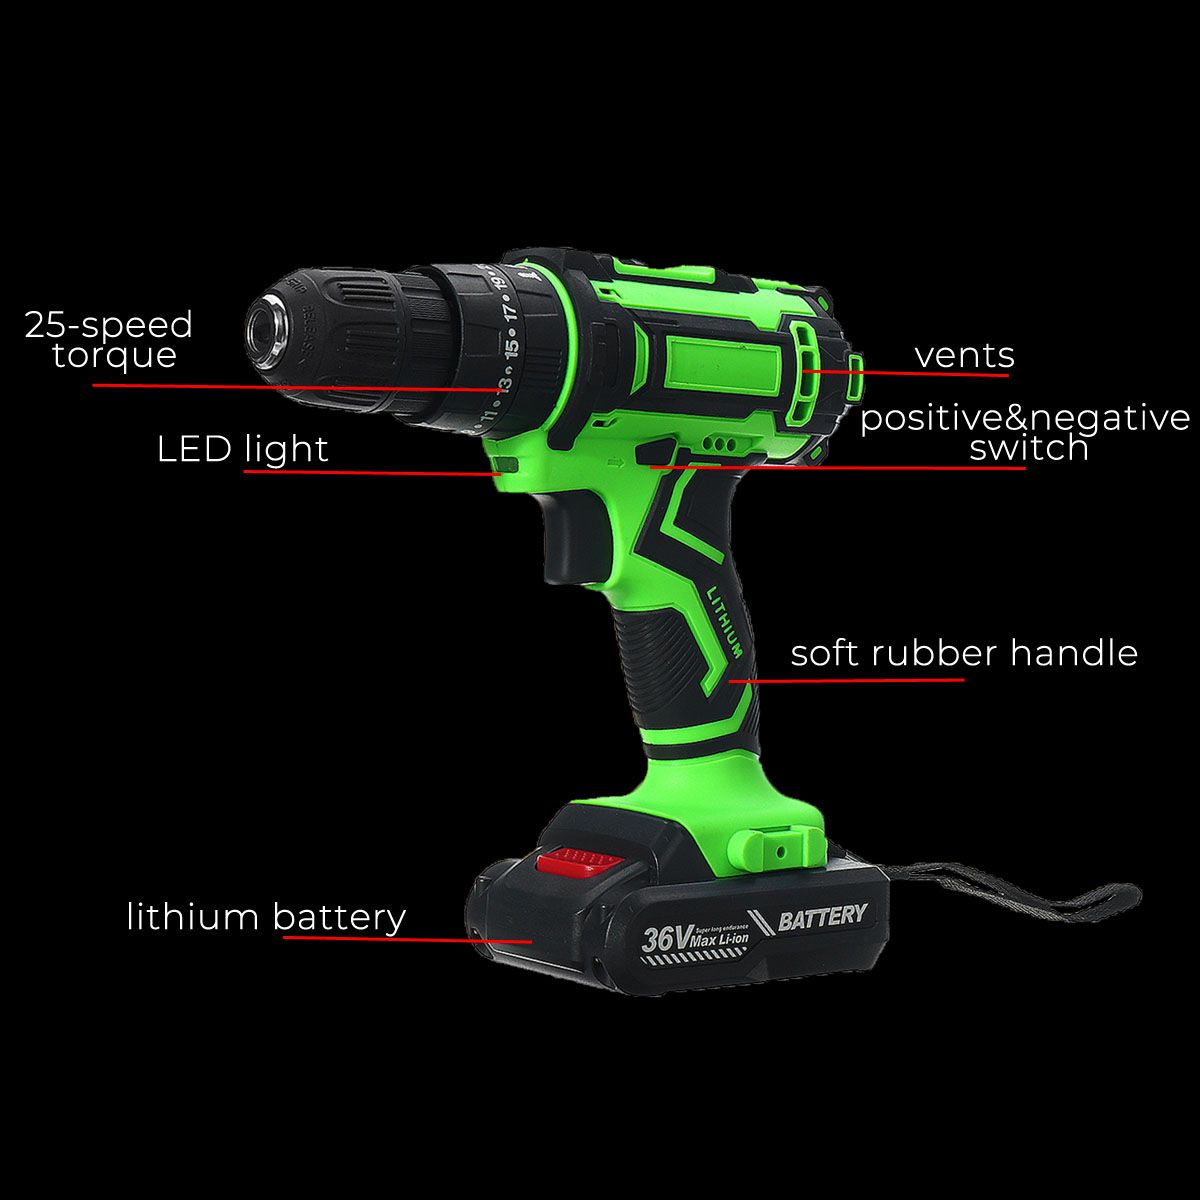 36V-Electric-Hand-Drill-Driver-253-Torque-Setting-Power-Drilling-DIY-Work-W-1-Or-2-Li-ion-battery-1582717